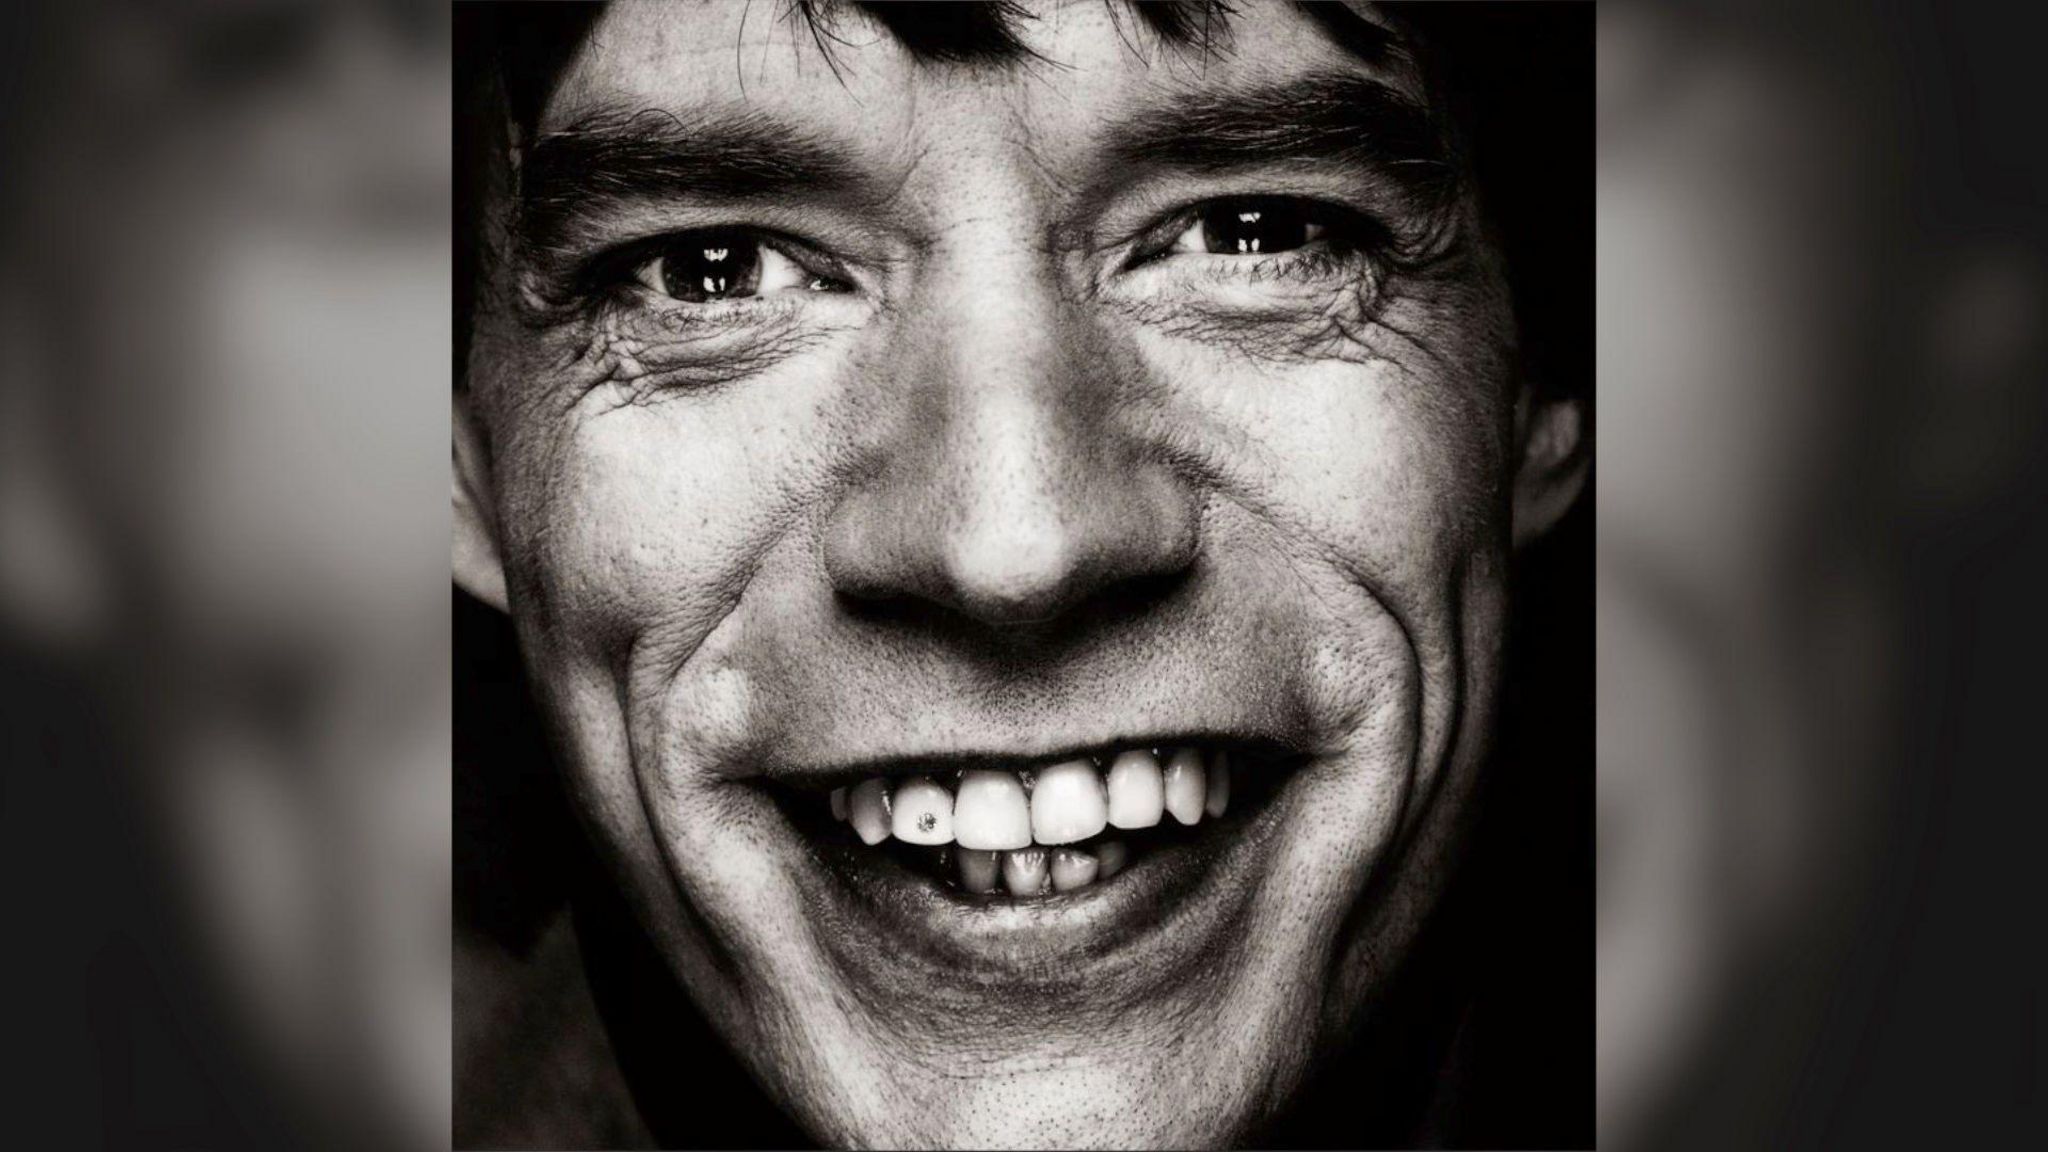 Mick Jagger with a diamond embedded in his tooth